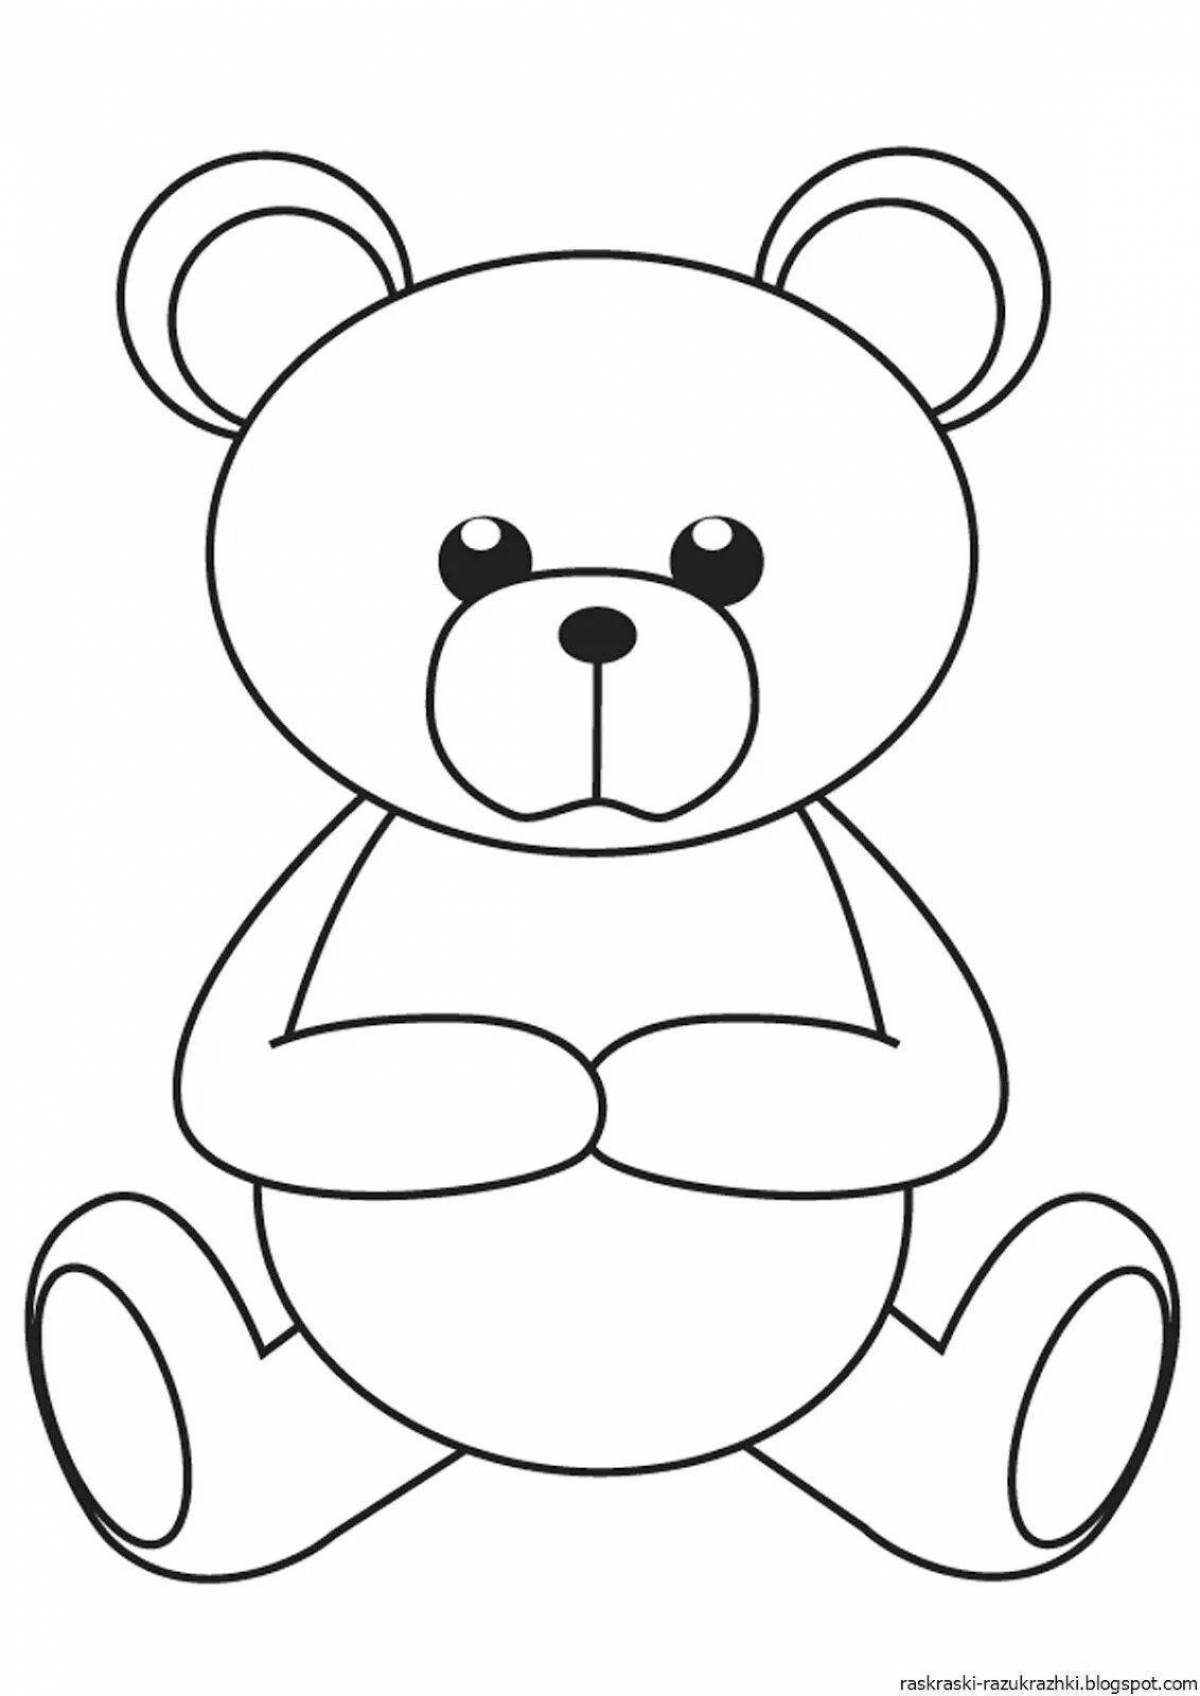 Playful teddy bear coloring page for kids